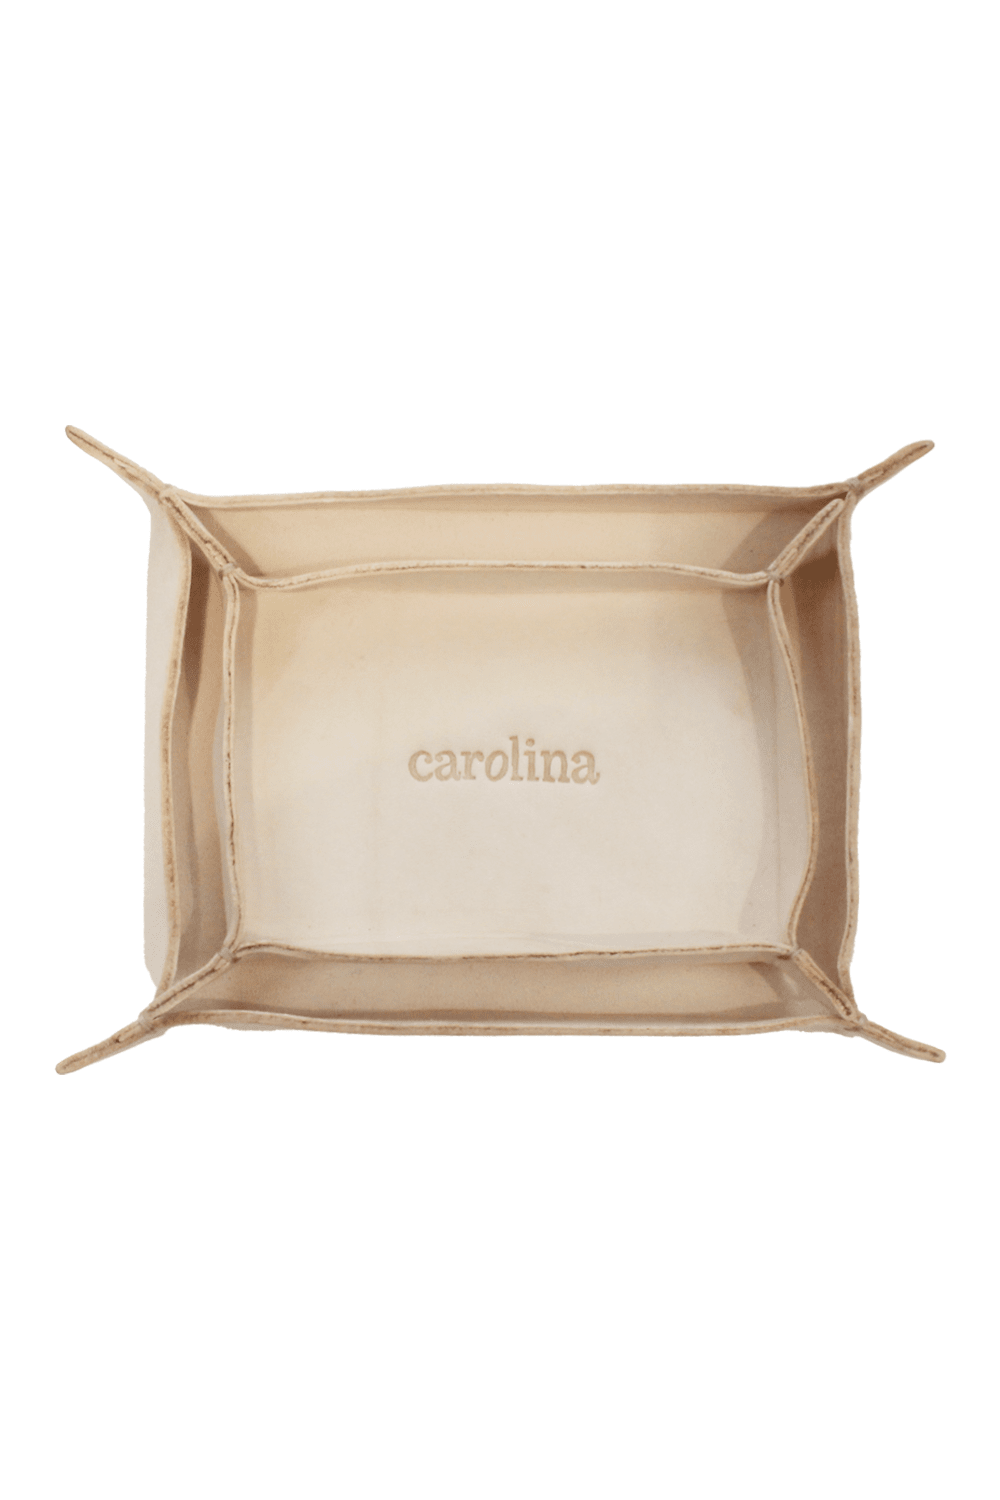 Leather Trays Pack of 2 Ivory Leather